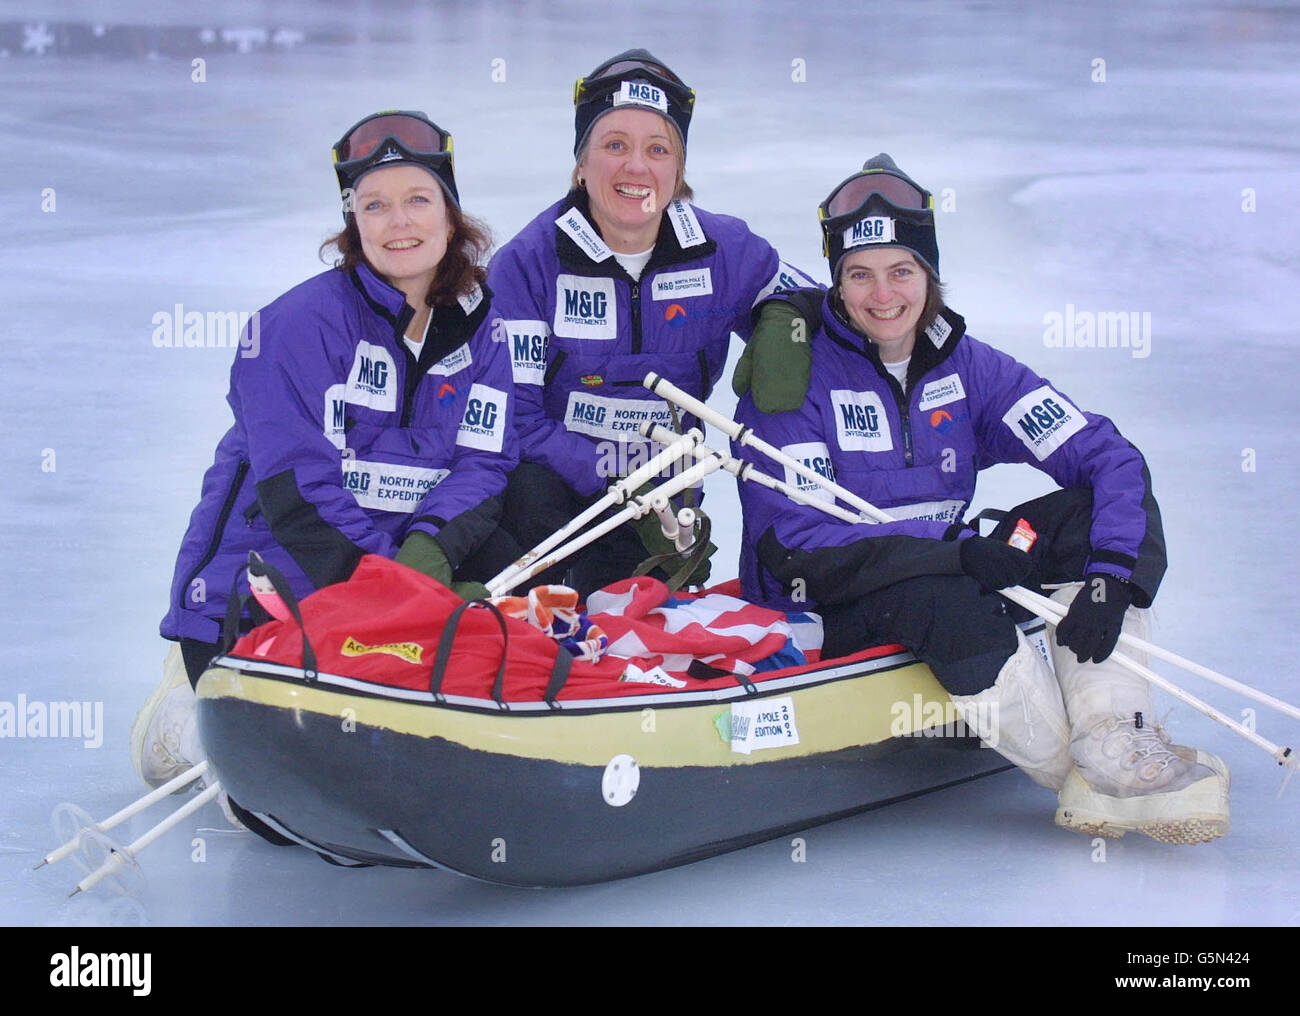 Left to right, Pom Oliver aged 50 from West Sussex, Ann Daniels age 37 from Exeter in Devon and Caroline Hamilton, 35 from London at a photo call in London for M&G Investments North Pole Expedition 2002. *The all female team will be the first British woman's team in the world to reach both Poles. They have already trekked to the South Pole. Stock Photo